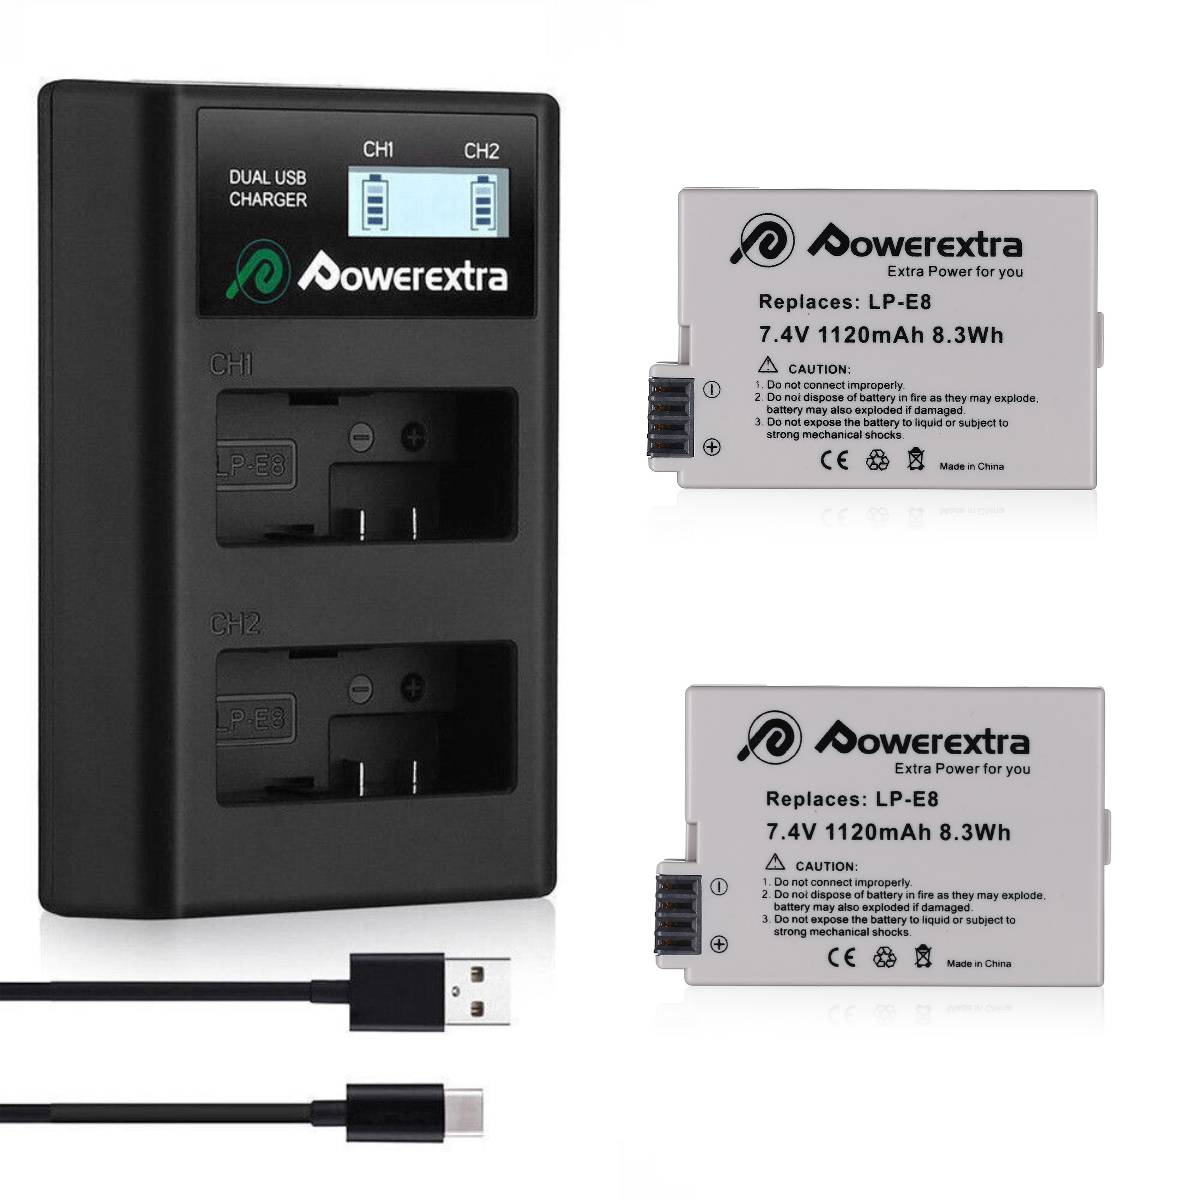 Powerextra Replacement LP-E8 Battery and Smart Dual USB Charger